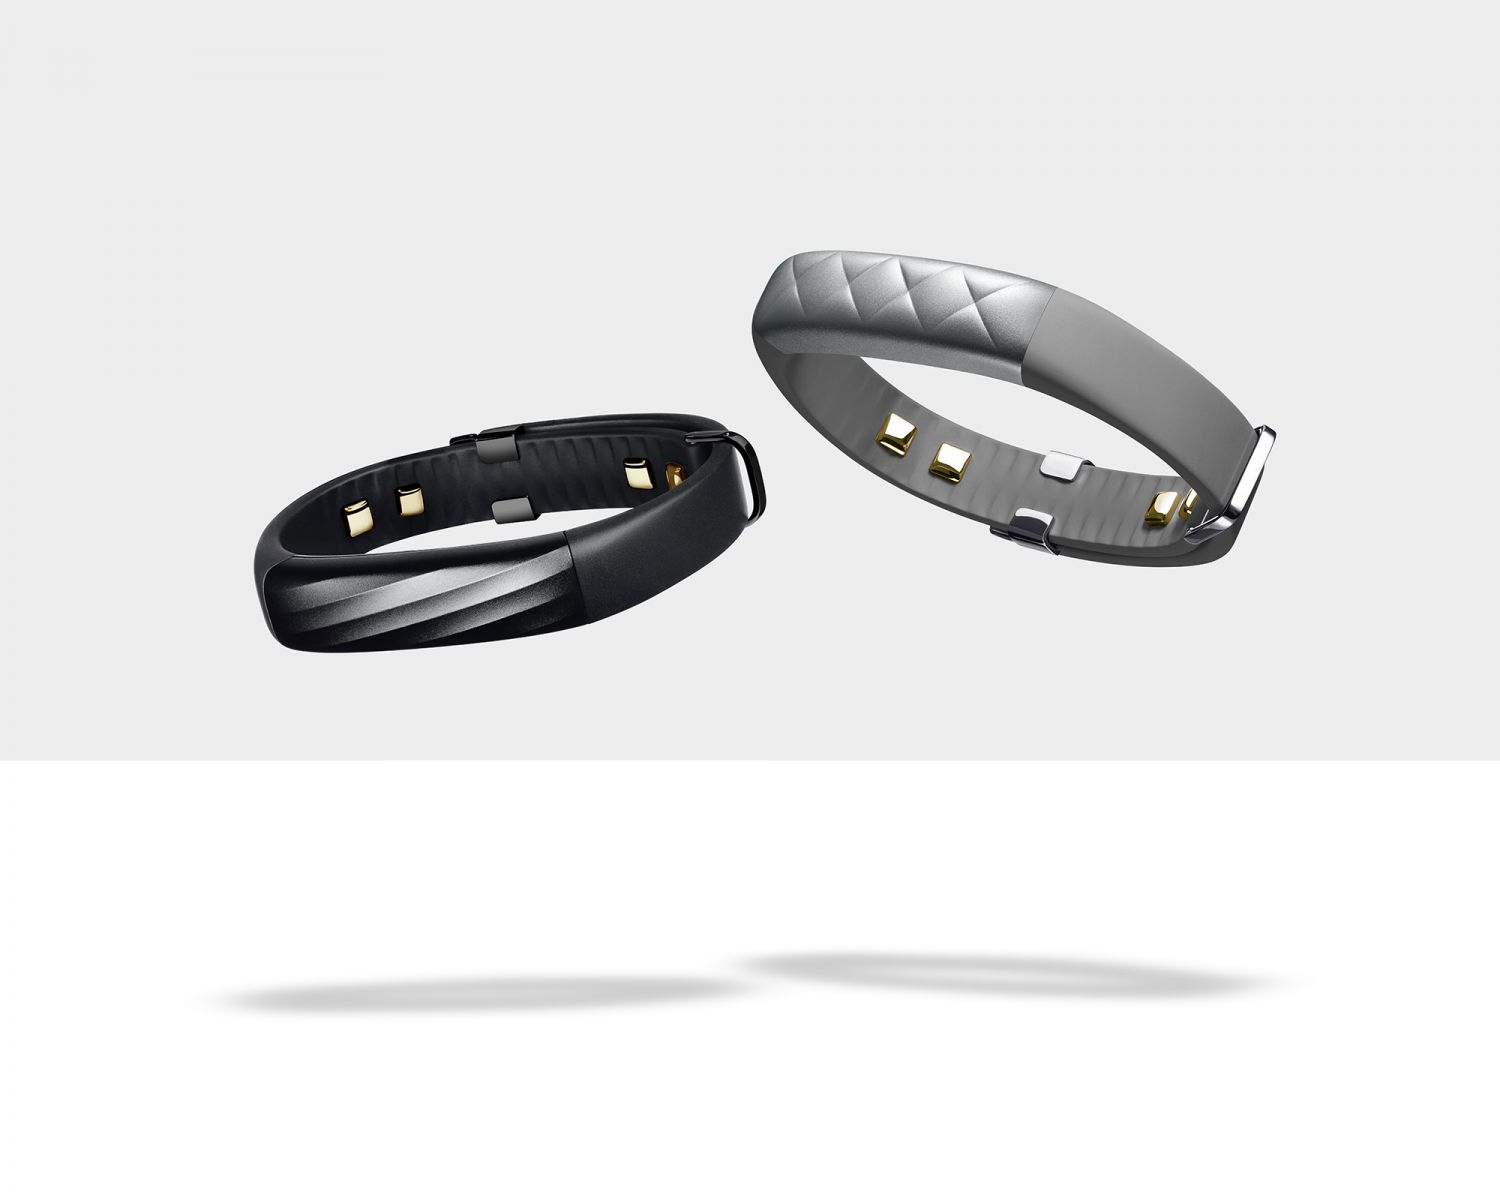 DNA Test: Fitbit Charge HR and Jawbone UP3 are for the fitness-minded (Updated)